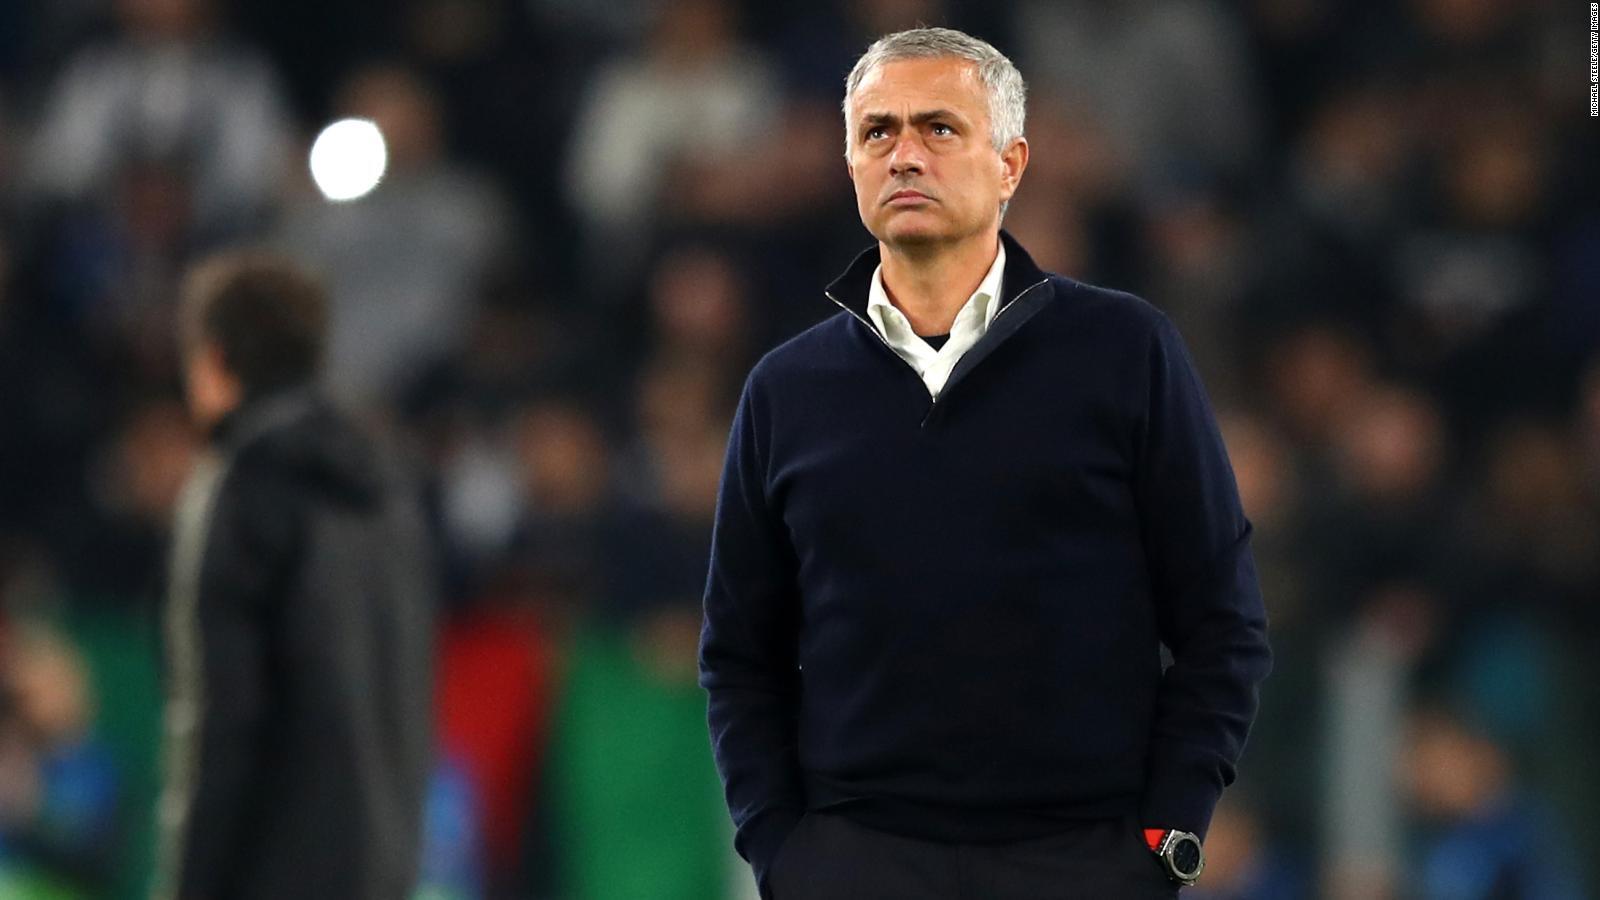 "Spurs lack substitute options compared to Man Utd": Mourinho  